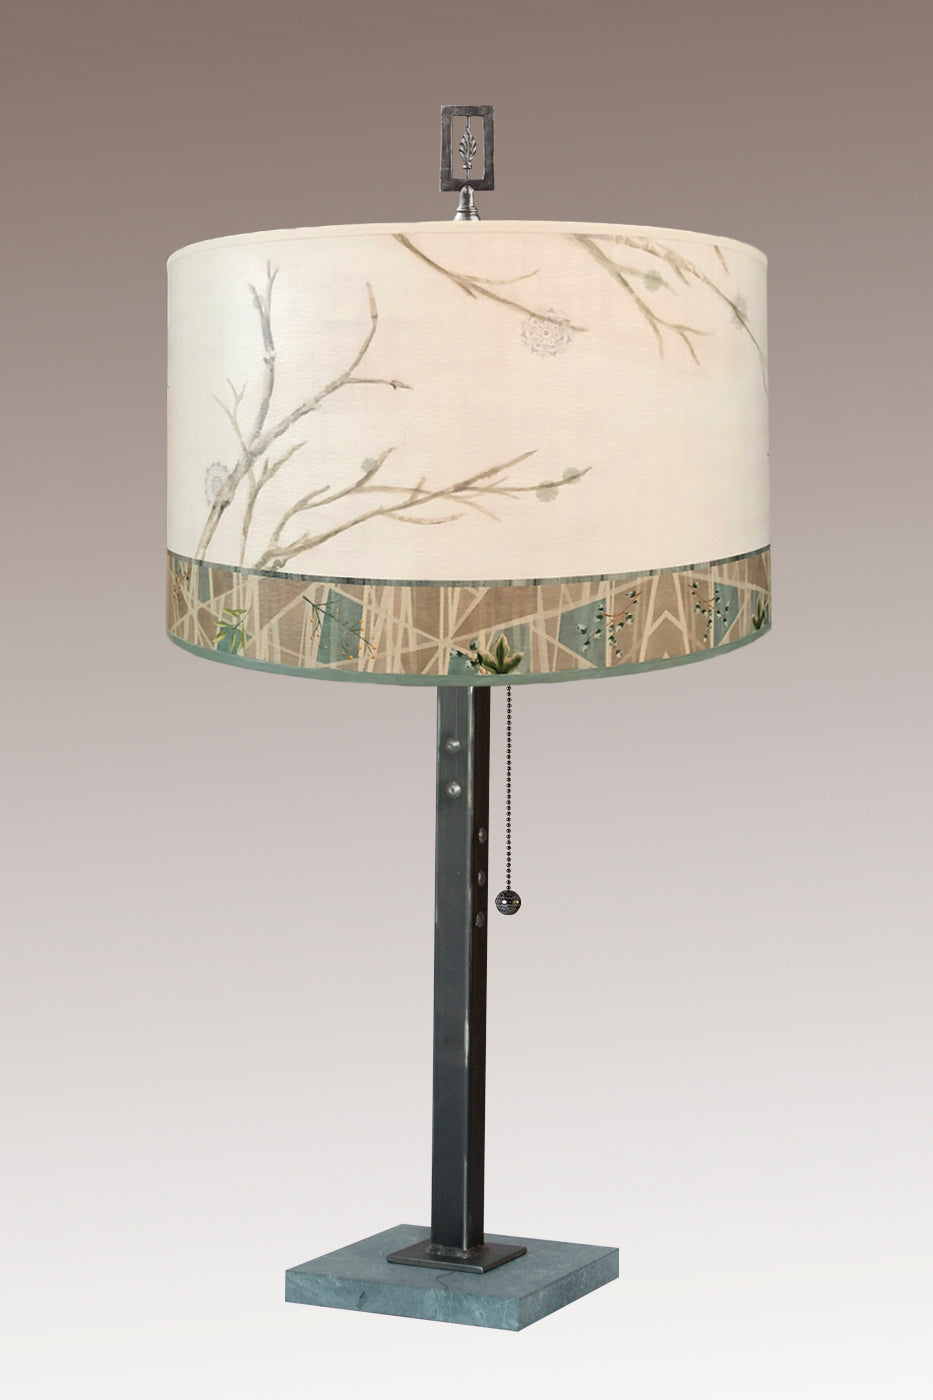 Steel Table Lamp with Large Drum Shade in Prism Branch